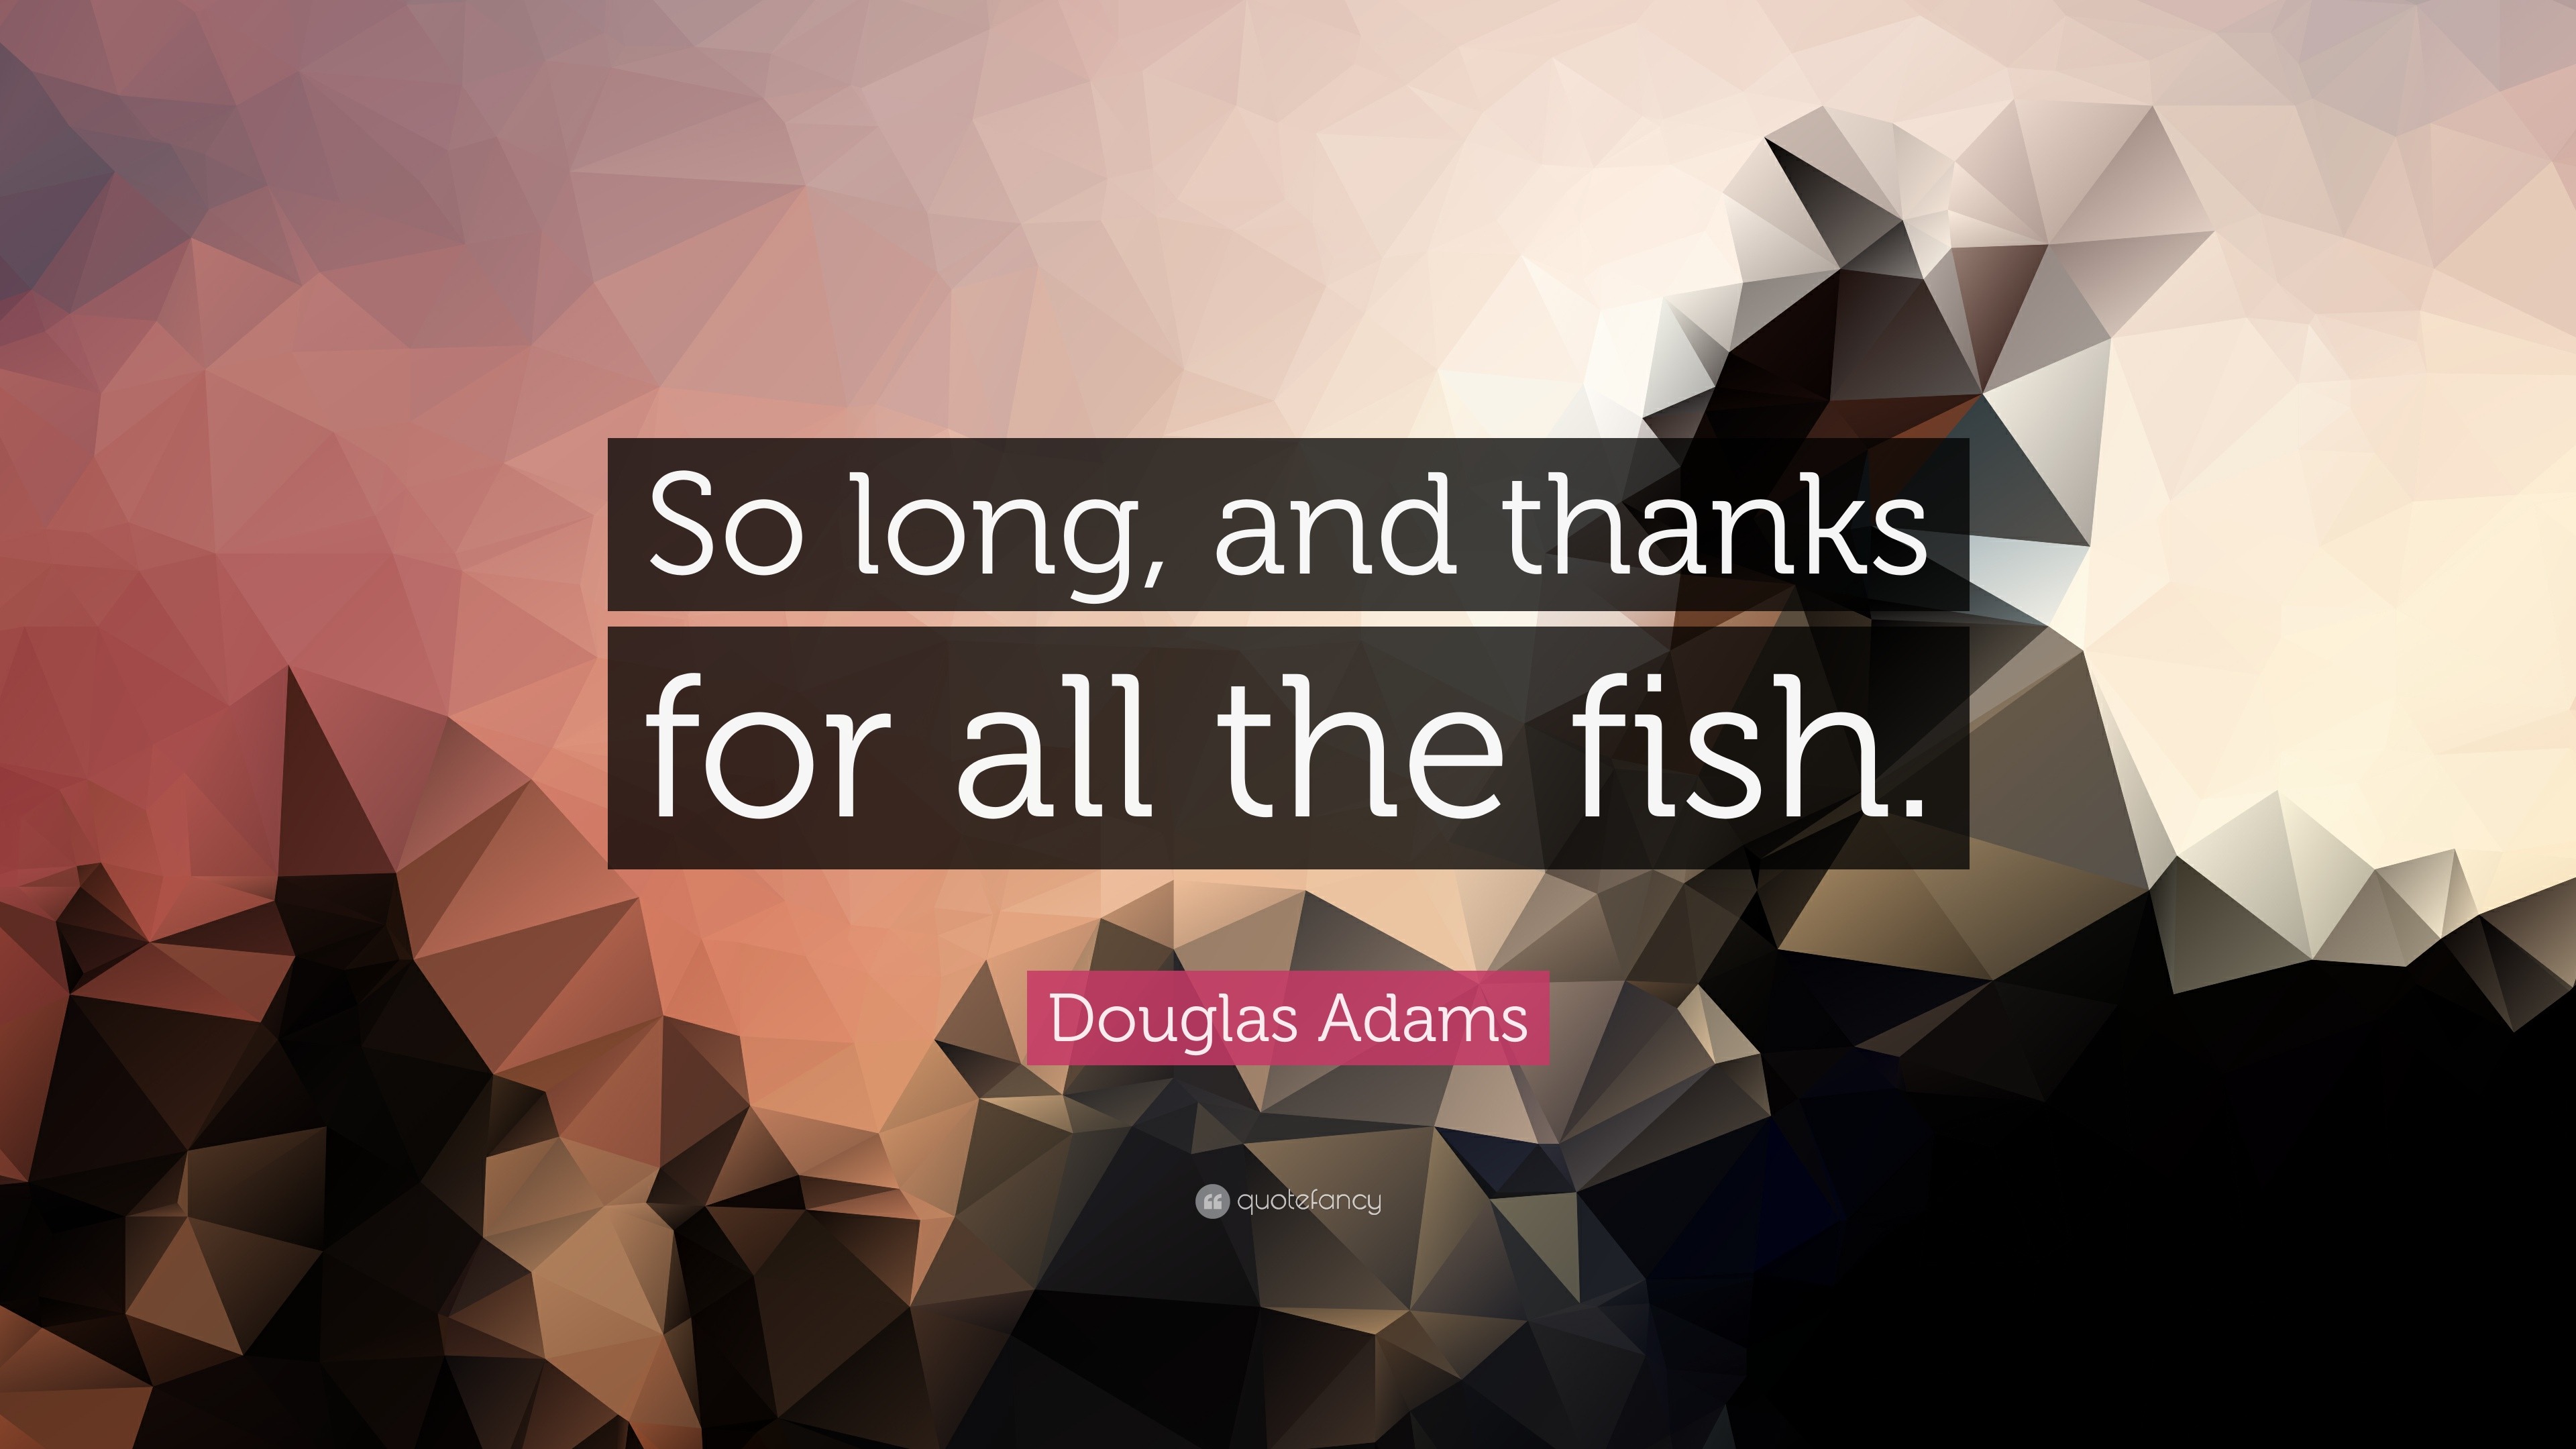 Douglas Adams Quote: "So long, and thanks for all the fish ...